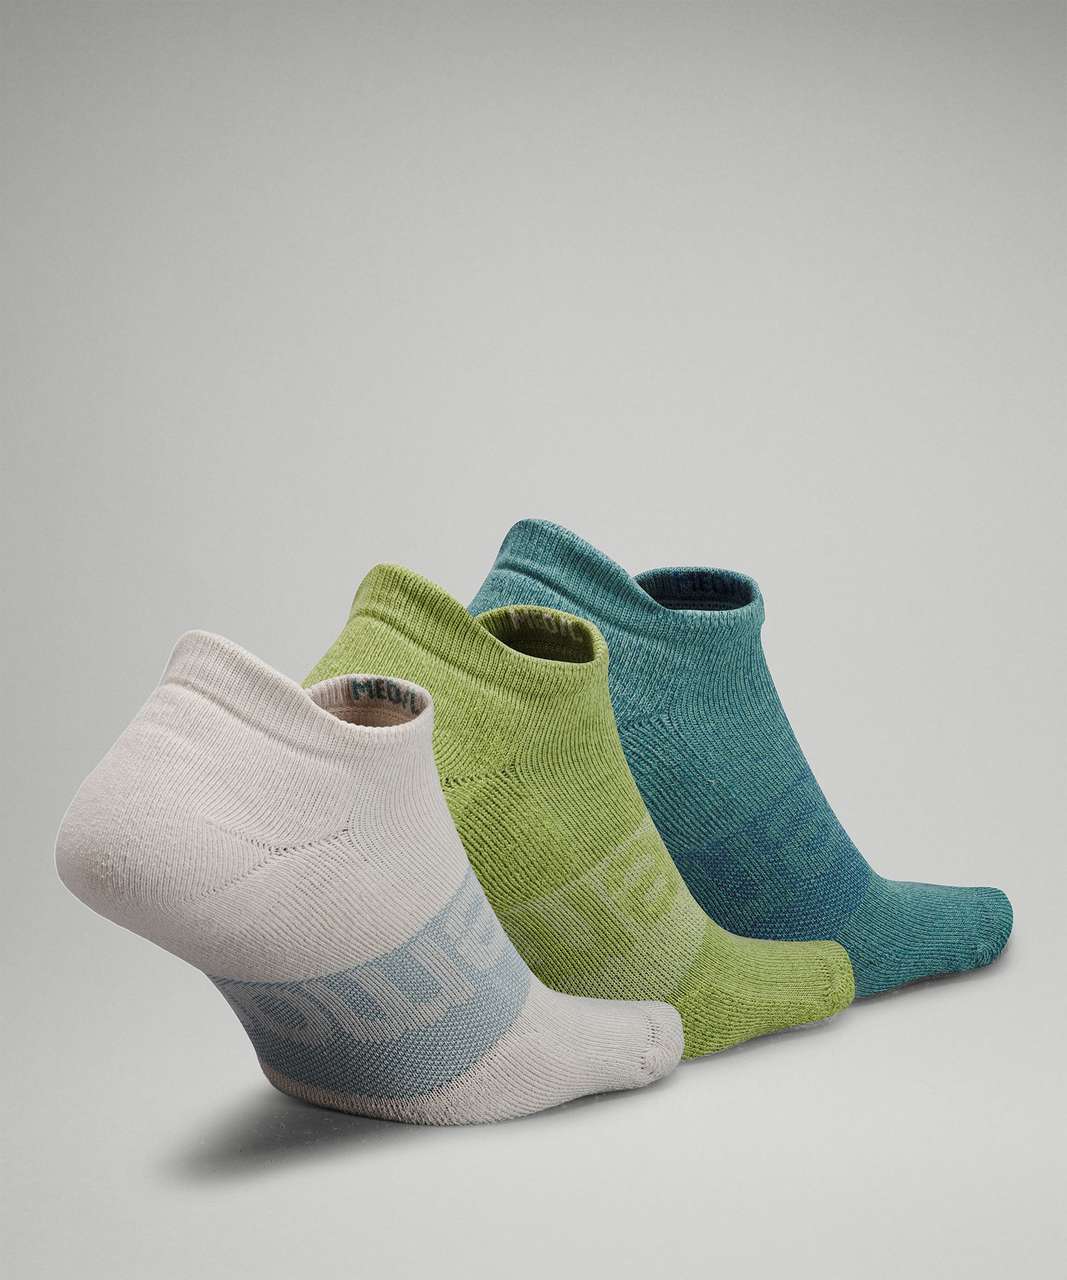 Lululemon Daily Stride Low-Ankle Sock 3 Pack - Natural Ivory / Green Foliage / Tidewater Teal